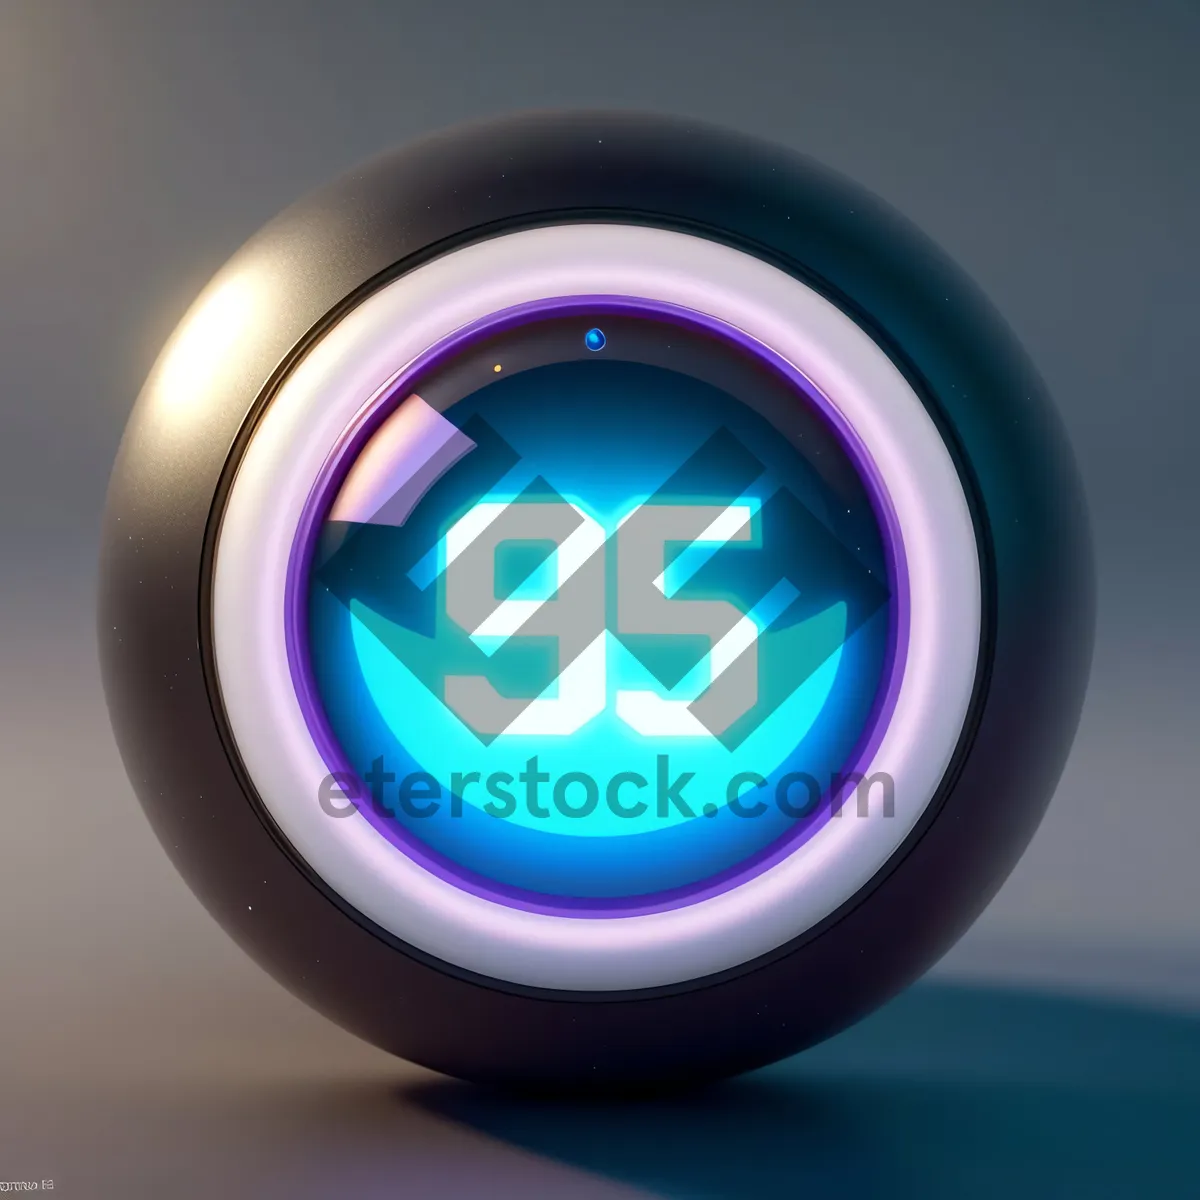 Picture of Glossy Round Web Button with Digital Clock Symbol